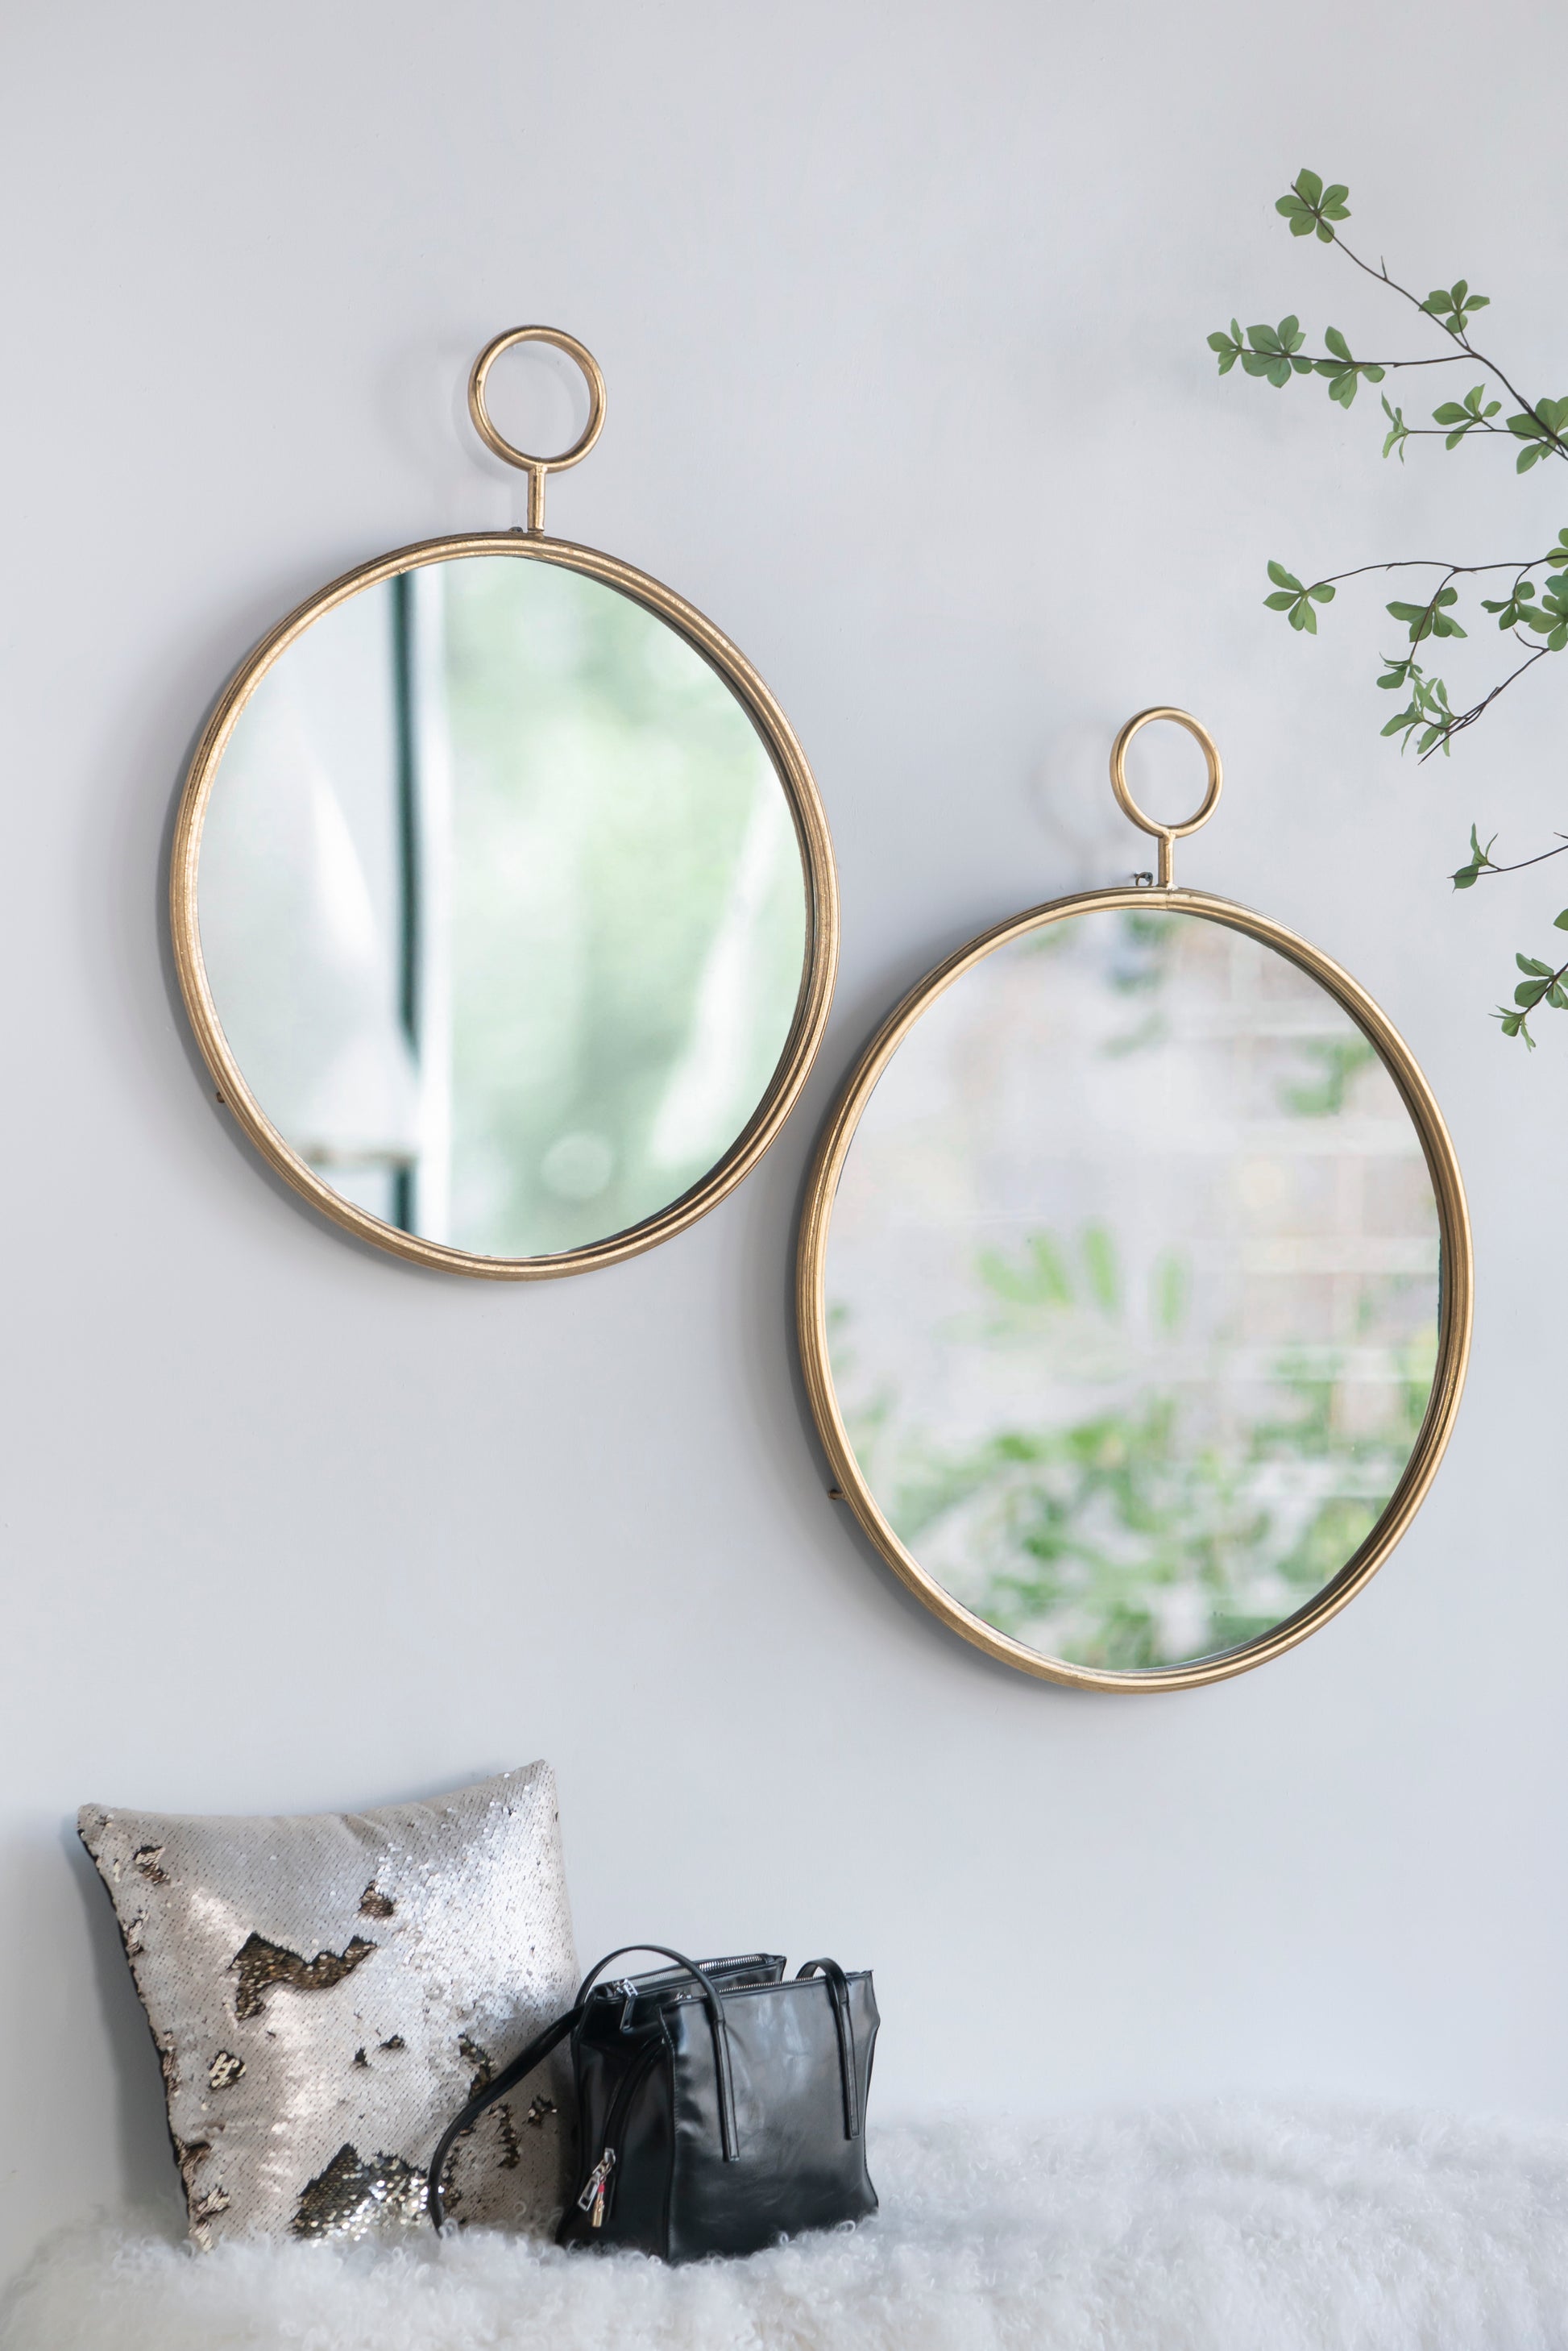 26" x 32" Circle Wall Mirror with Gold Metal Frame gold-iron